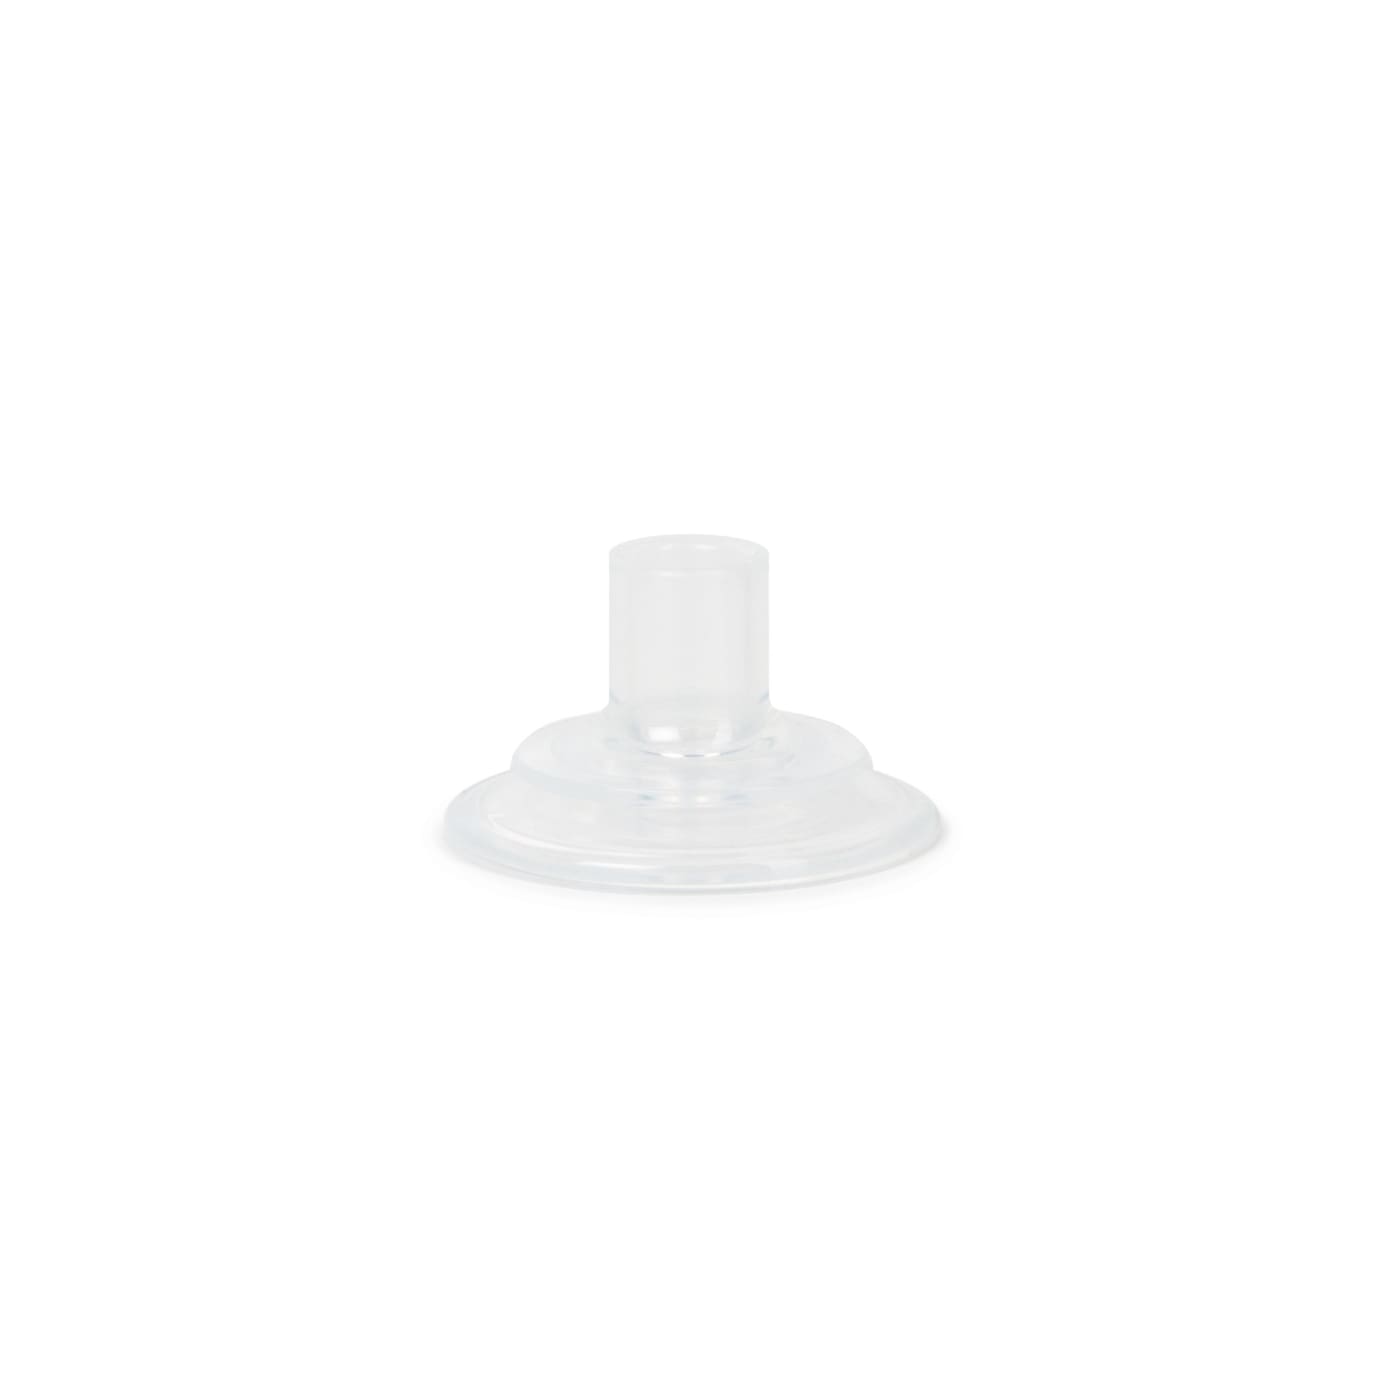 Subo Clear Silicone Spout - Large - Large - NURSING & FEEDING - CONTAINERS/FEEDERS